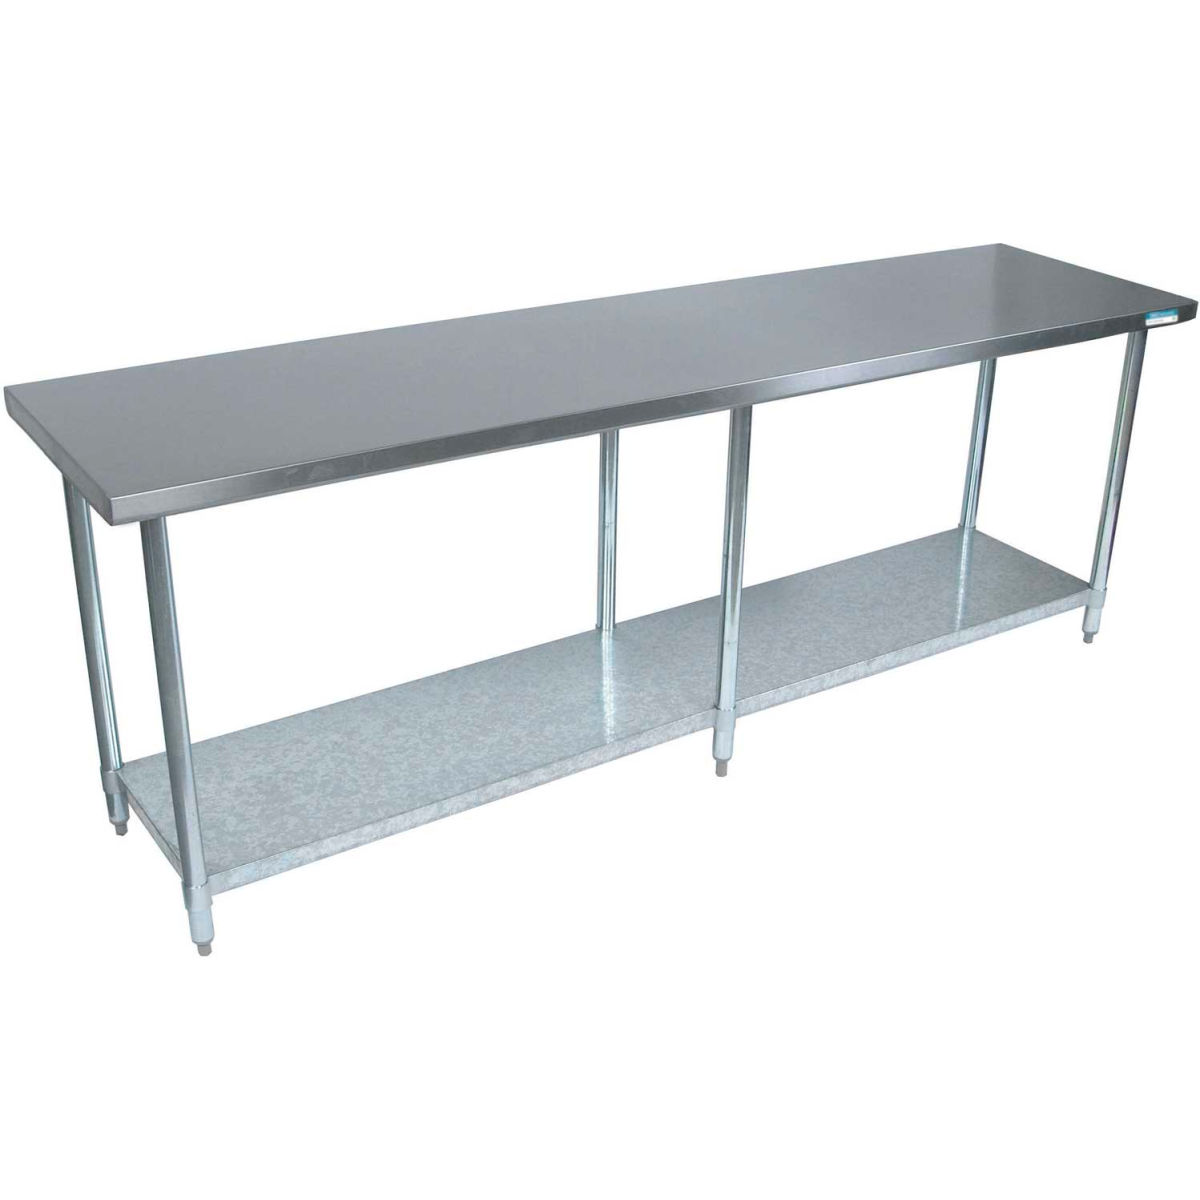 Picture of BK Resources B0899467 18 Gauge 430 Series Stainless & Galvanised Shelf Workbench with Undershelf - 96 x 18 in.